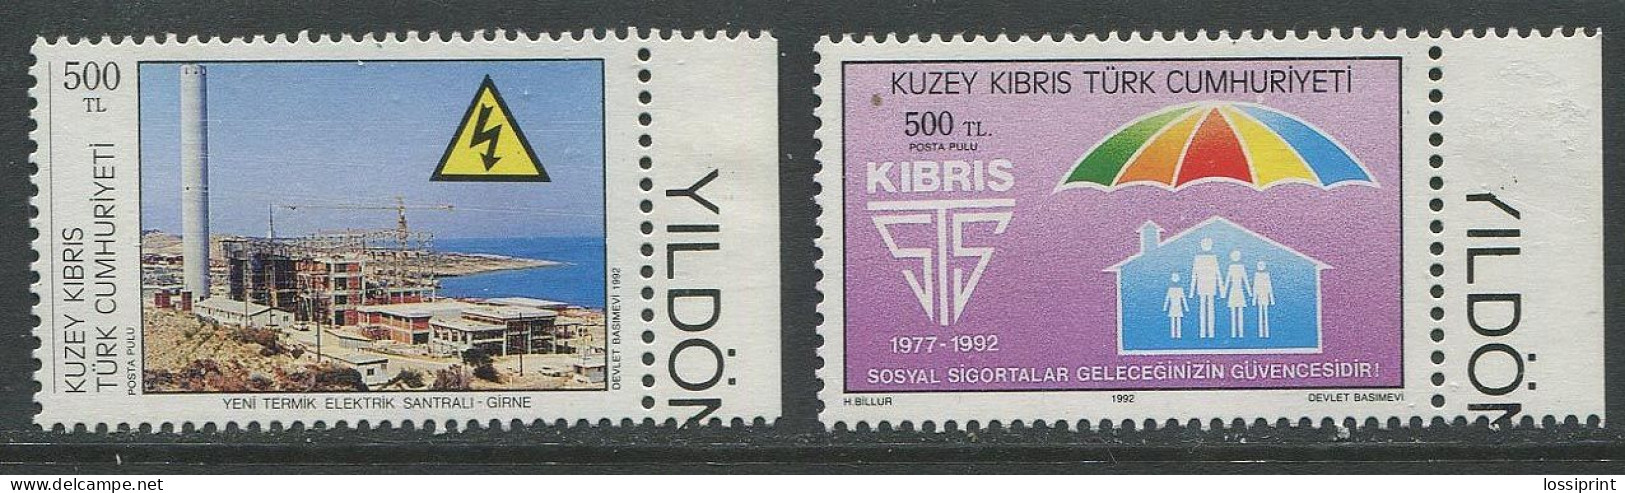 Turkey:Unused Stamps Electric Station And Social Theme, 1992, MNH - Unused Stamps